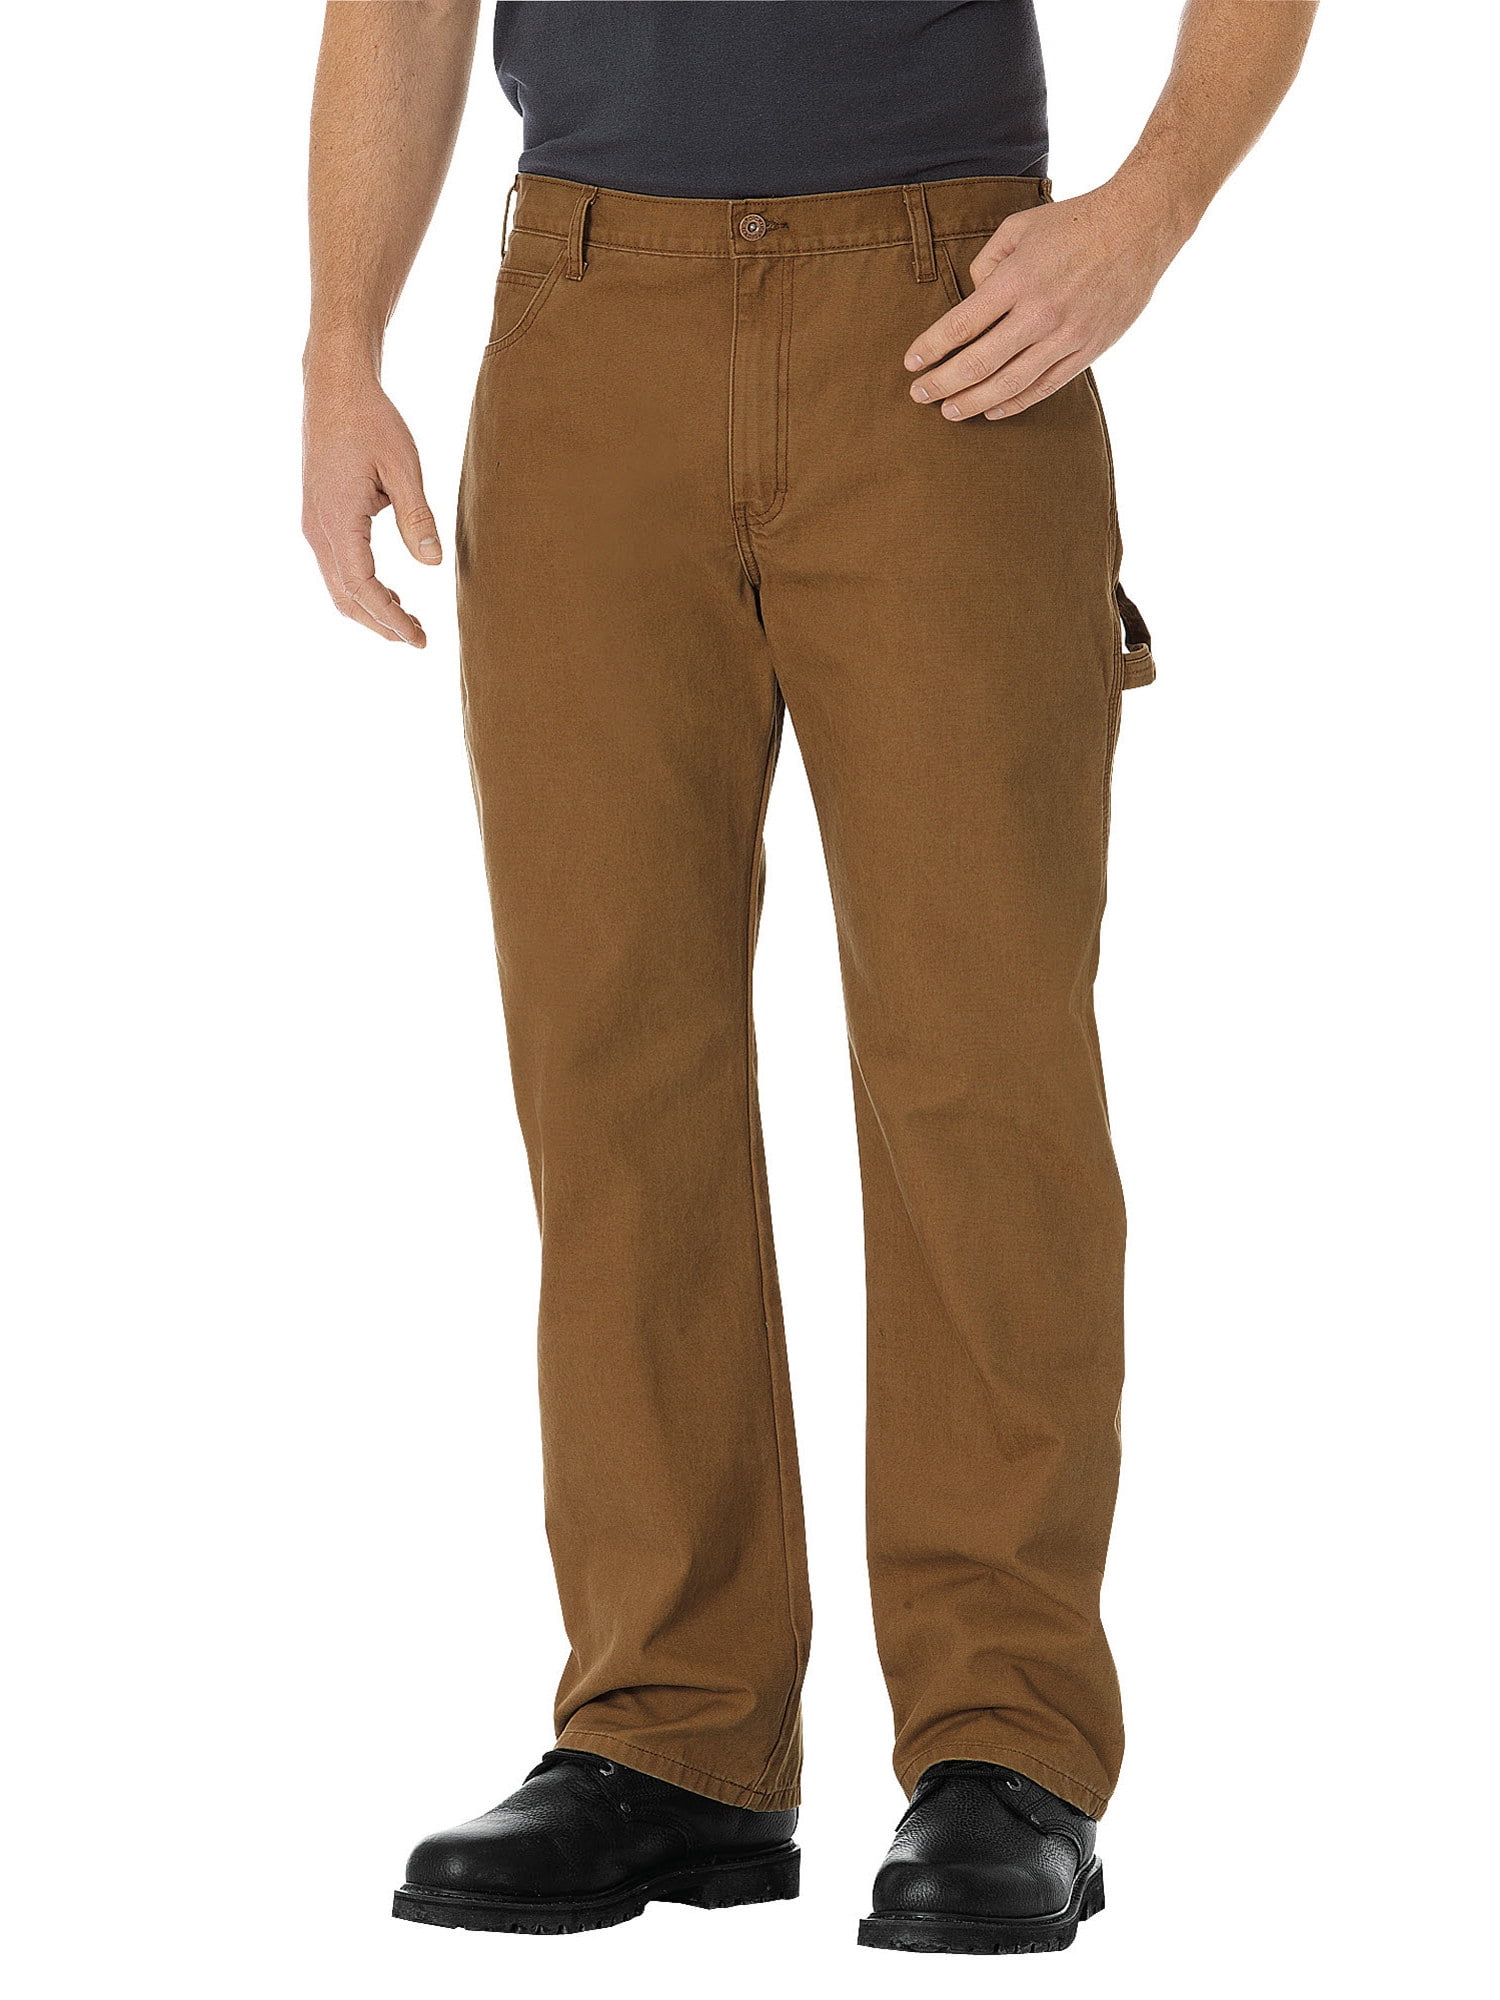 Mens Relaxed Fit Straight-Leg Duck Carpenter Jean Denim Work Pants with Pockets